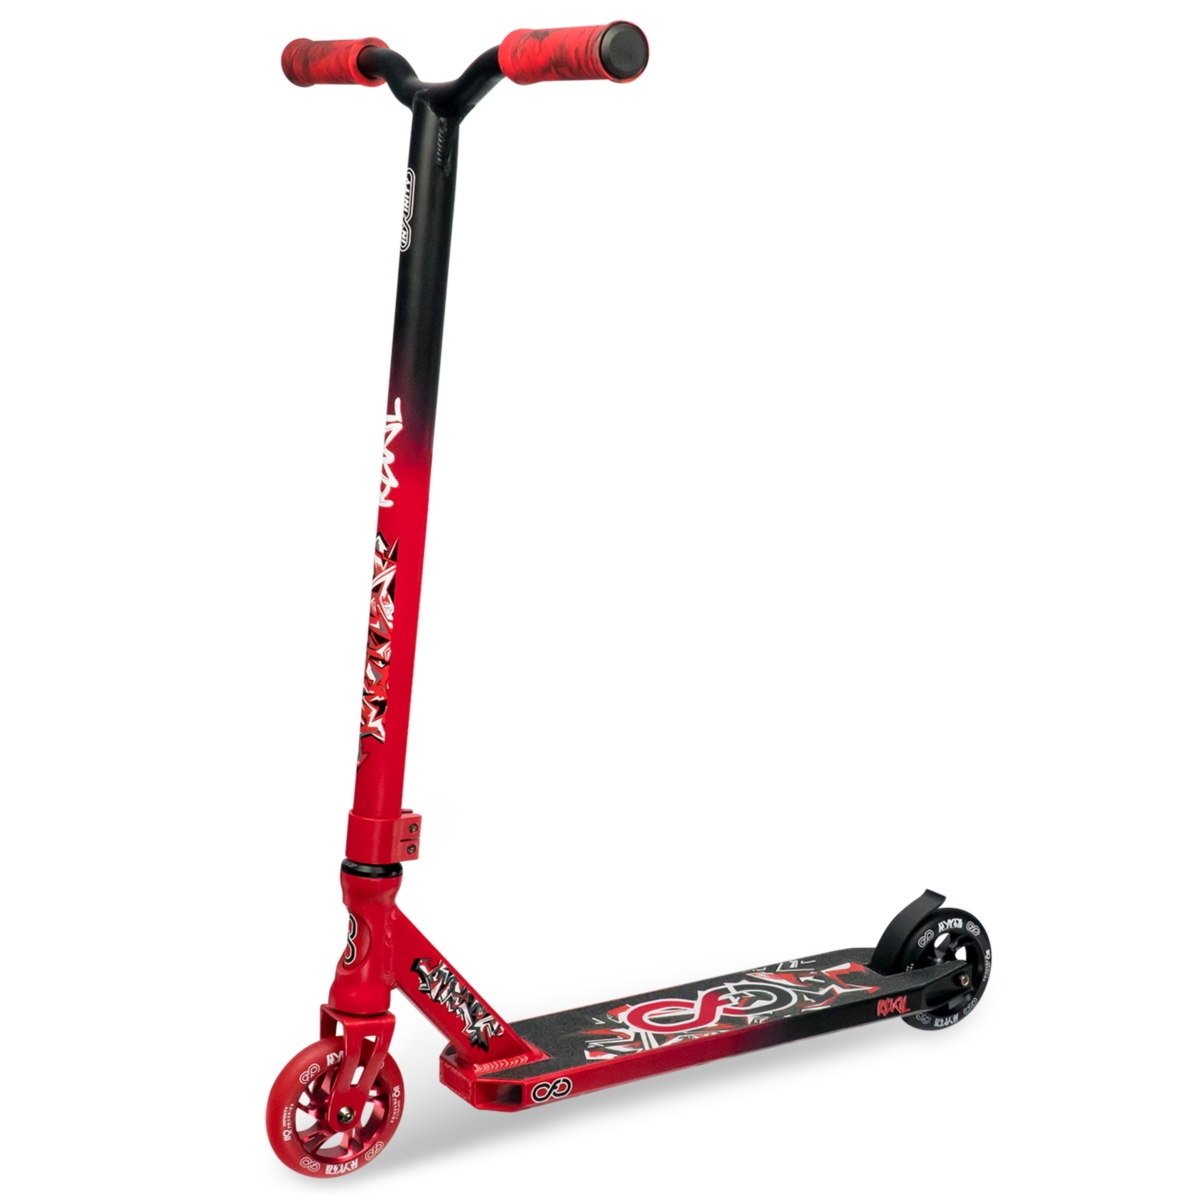 Revel Kick Scooter By Fun Trick Scooters For Stunts On The Street And Skate Park - Black/red